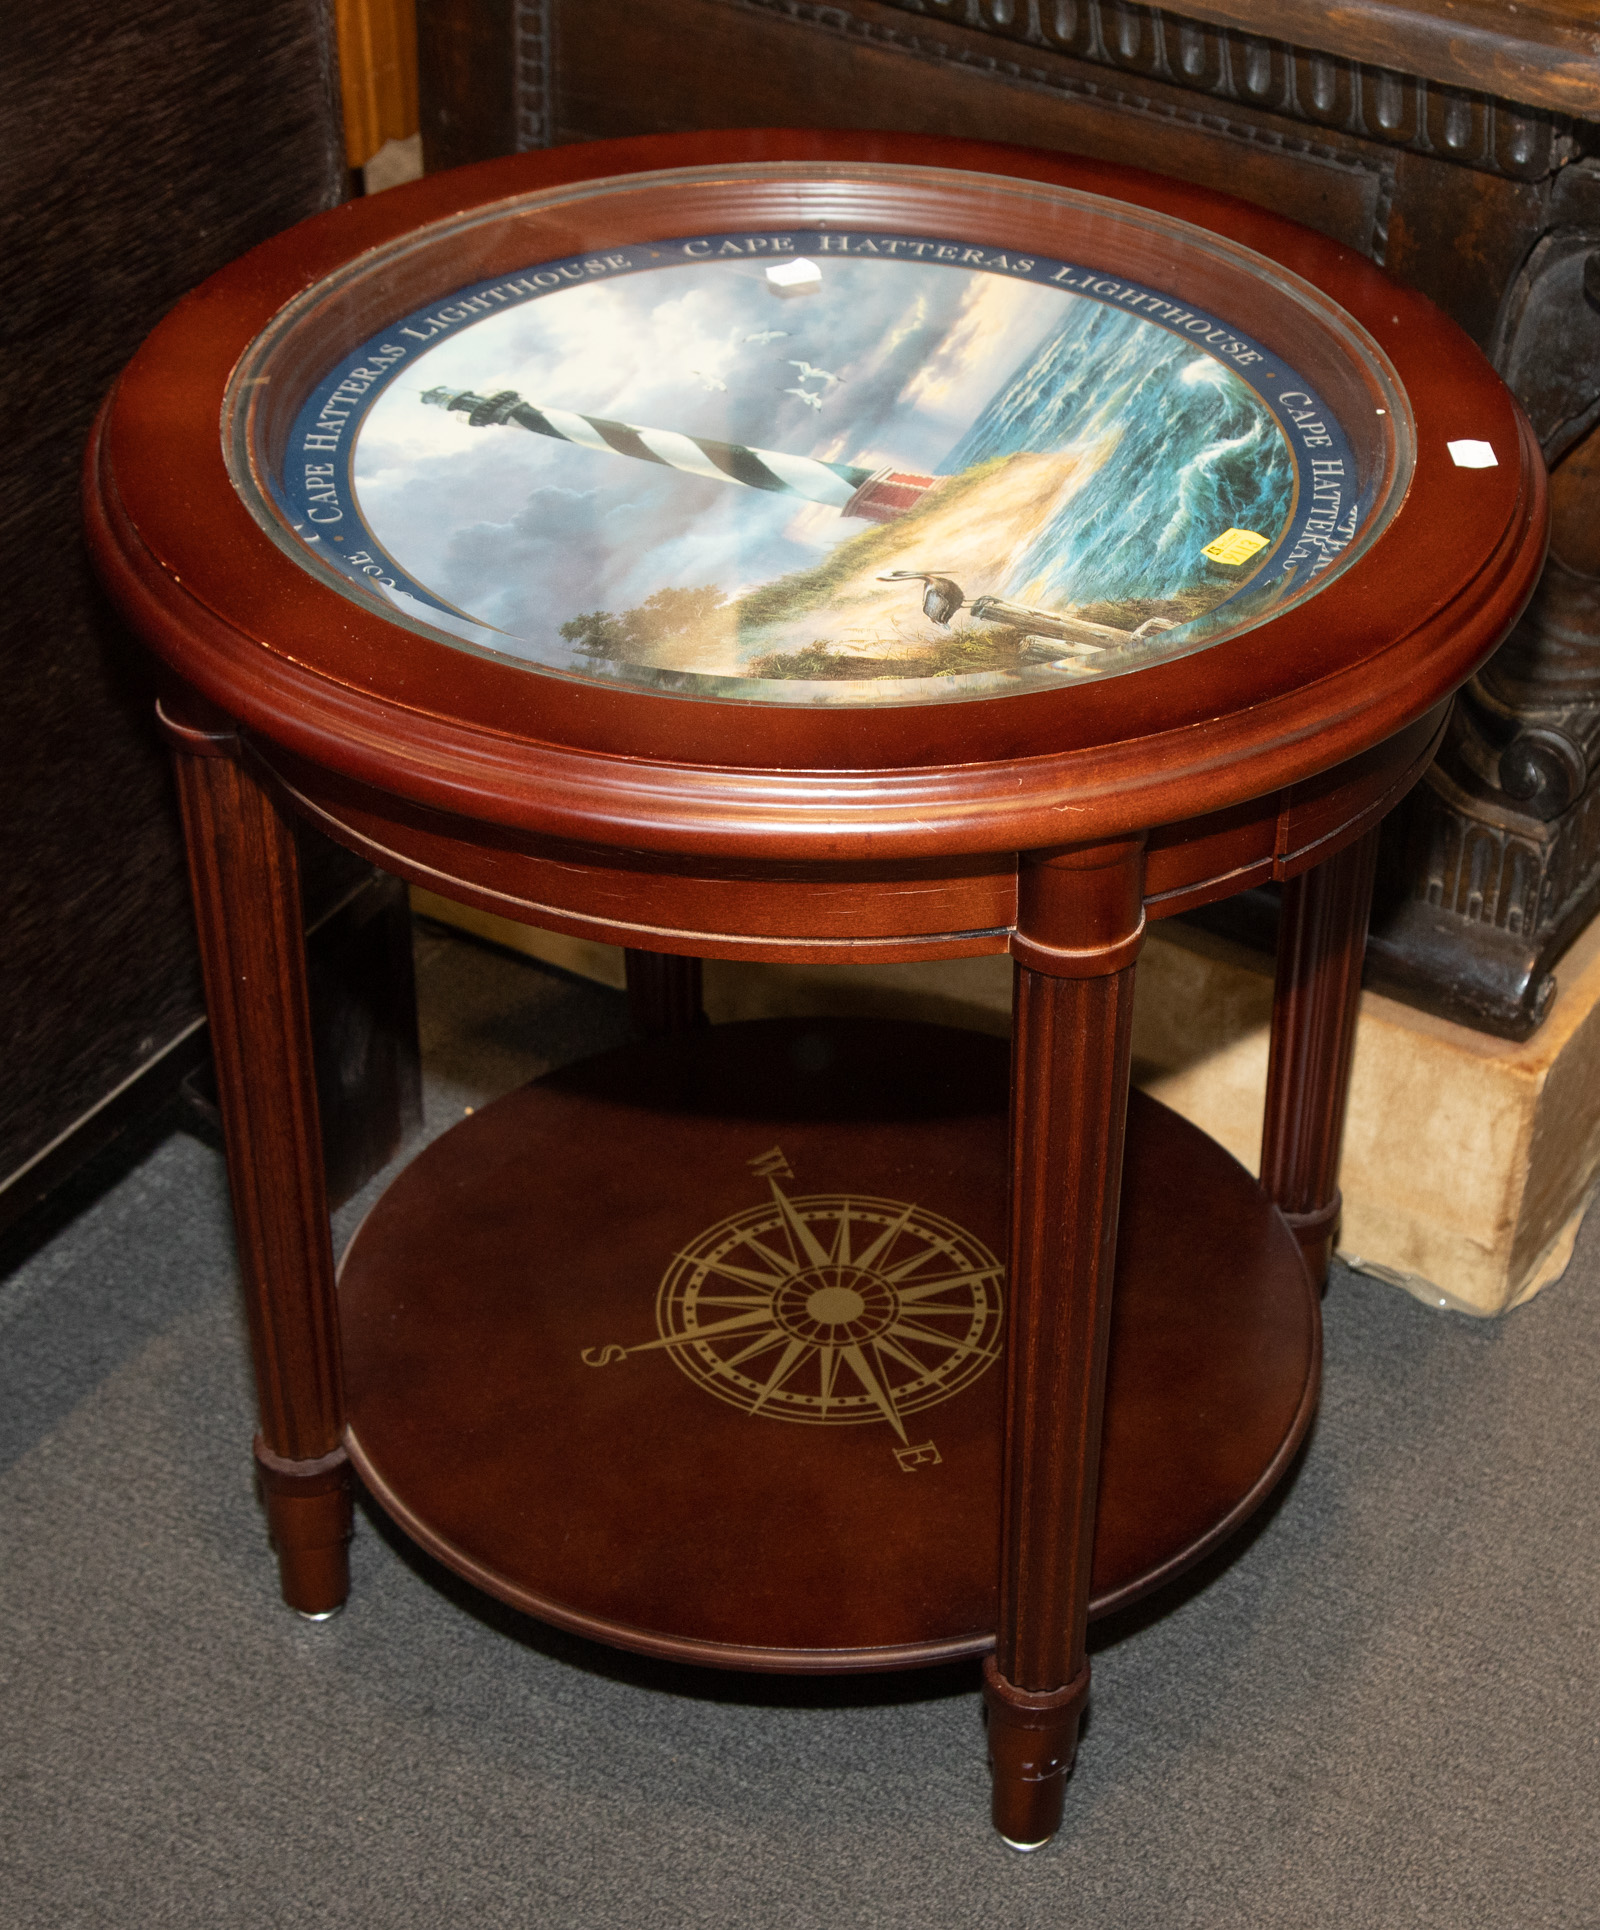 CAPE HATTERAS LIGHTHOUSE END TABLE